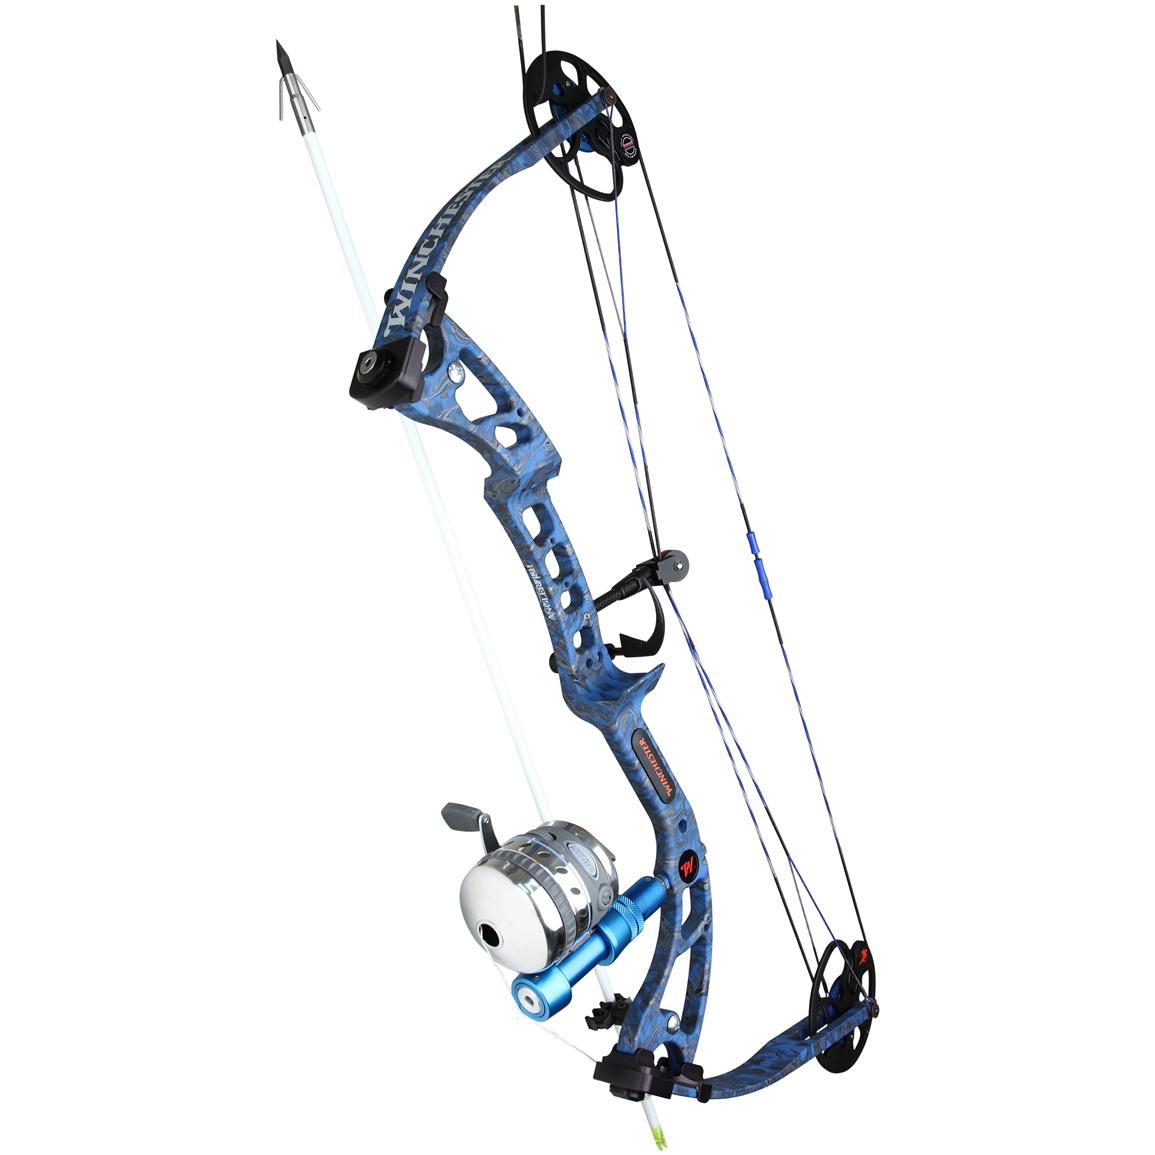 Winchester® Anglerfish SST 46lb. Bowfishing Compound Bow